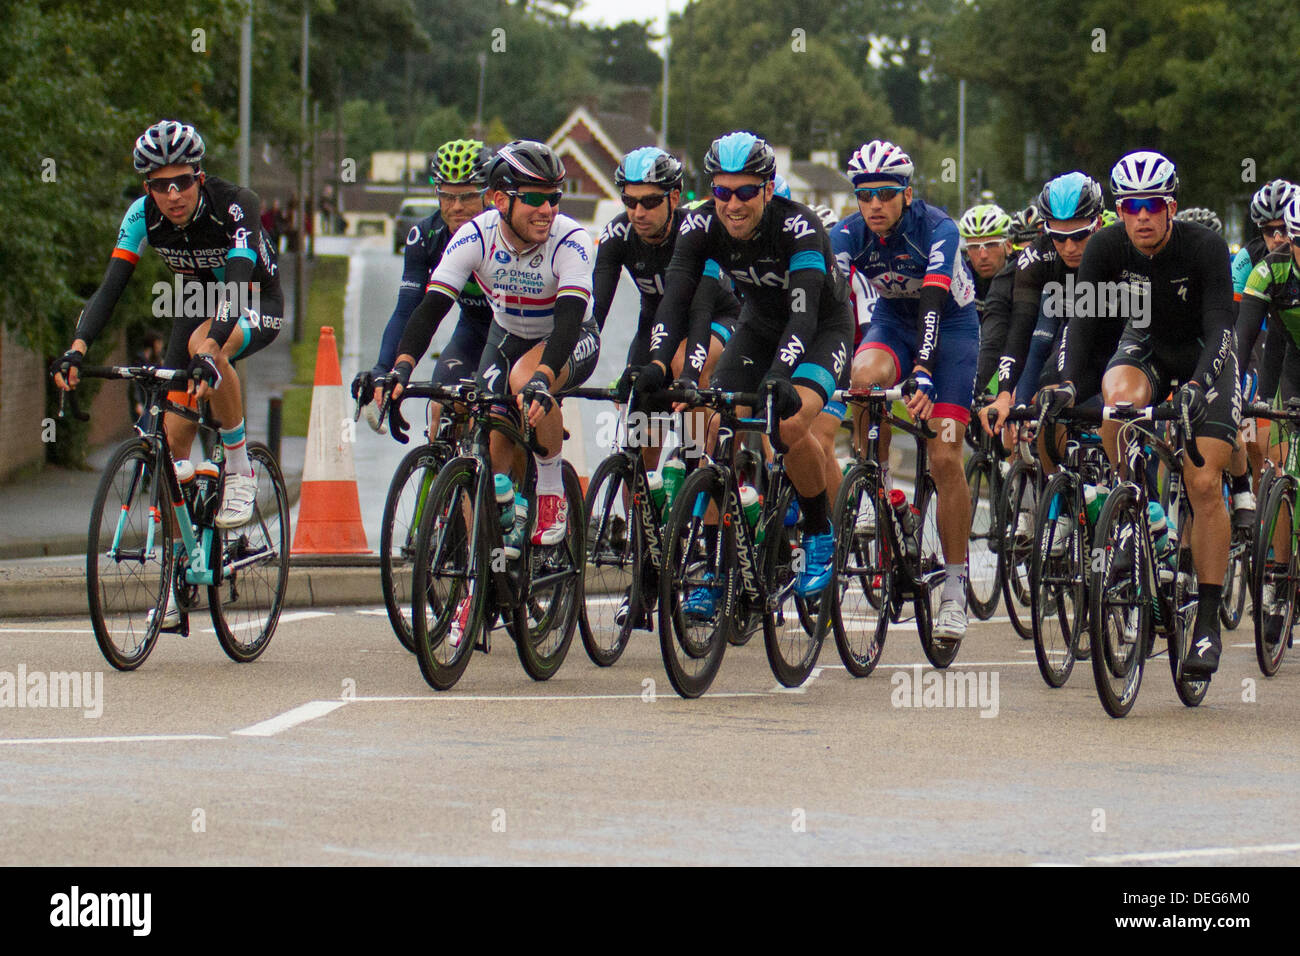 Stoke on Trent, Staffordshire, UK. 18th Sep, 2013. Mark Cavendish of Omega Pharma Quick-step shares a joke with Team Sky as they pass through the Trentham area of Stoke on Trent, Staffordshire on stage 4 of the Tour of Britain. Credit:  Alex Williams/Alamy Live News Stock Photo